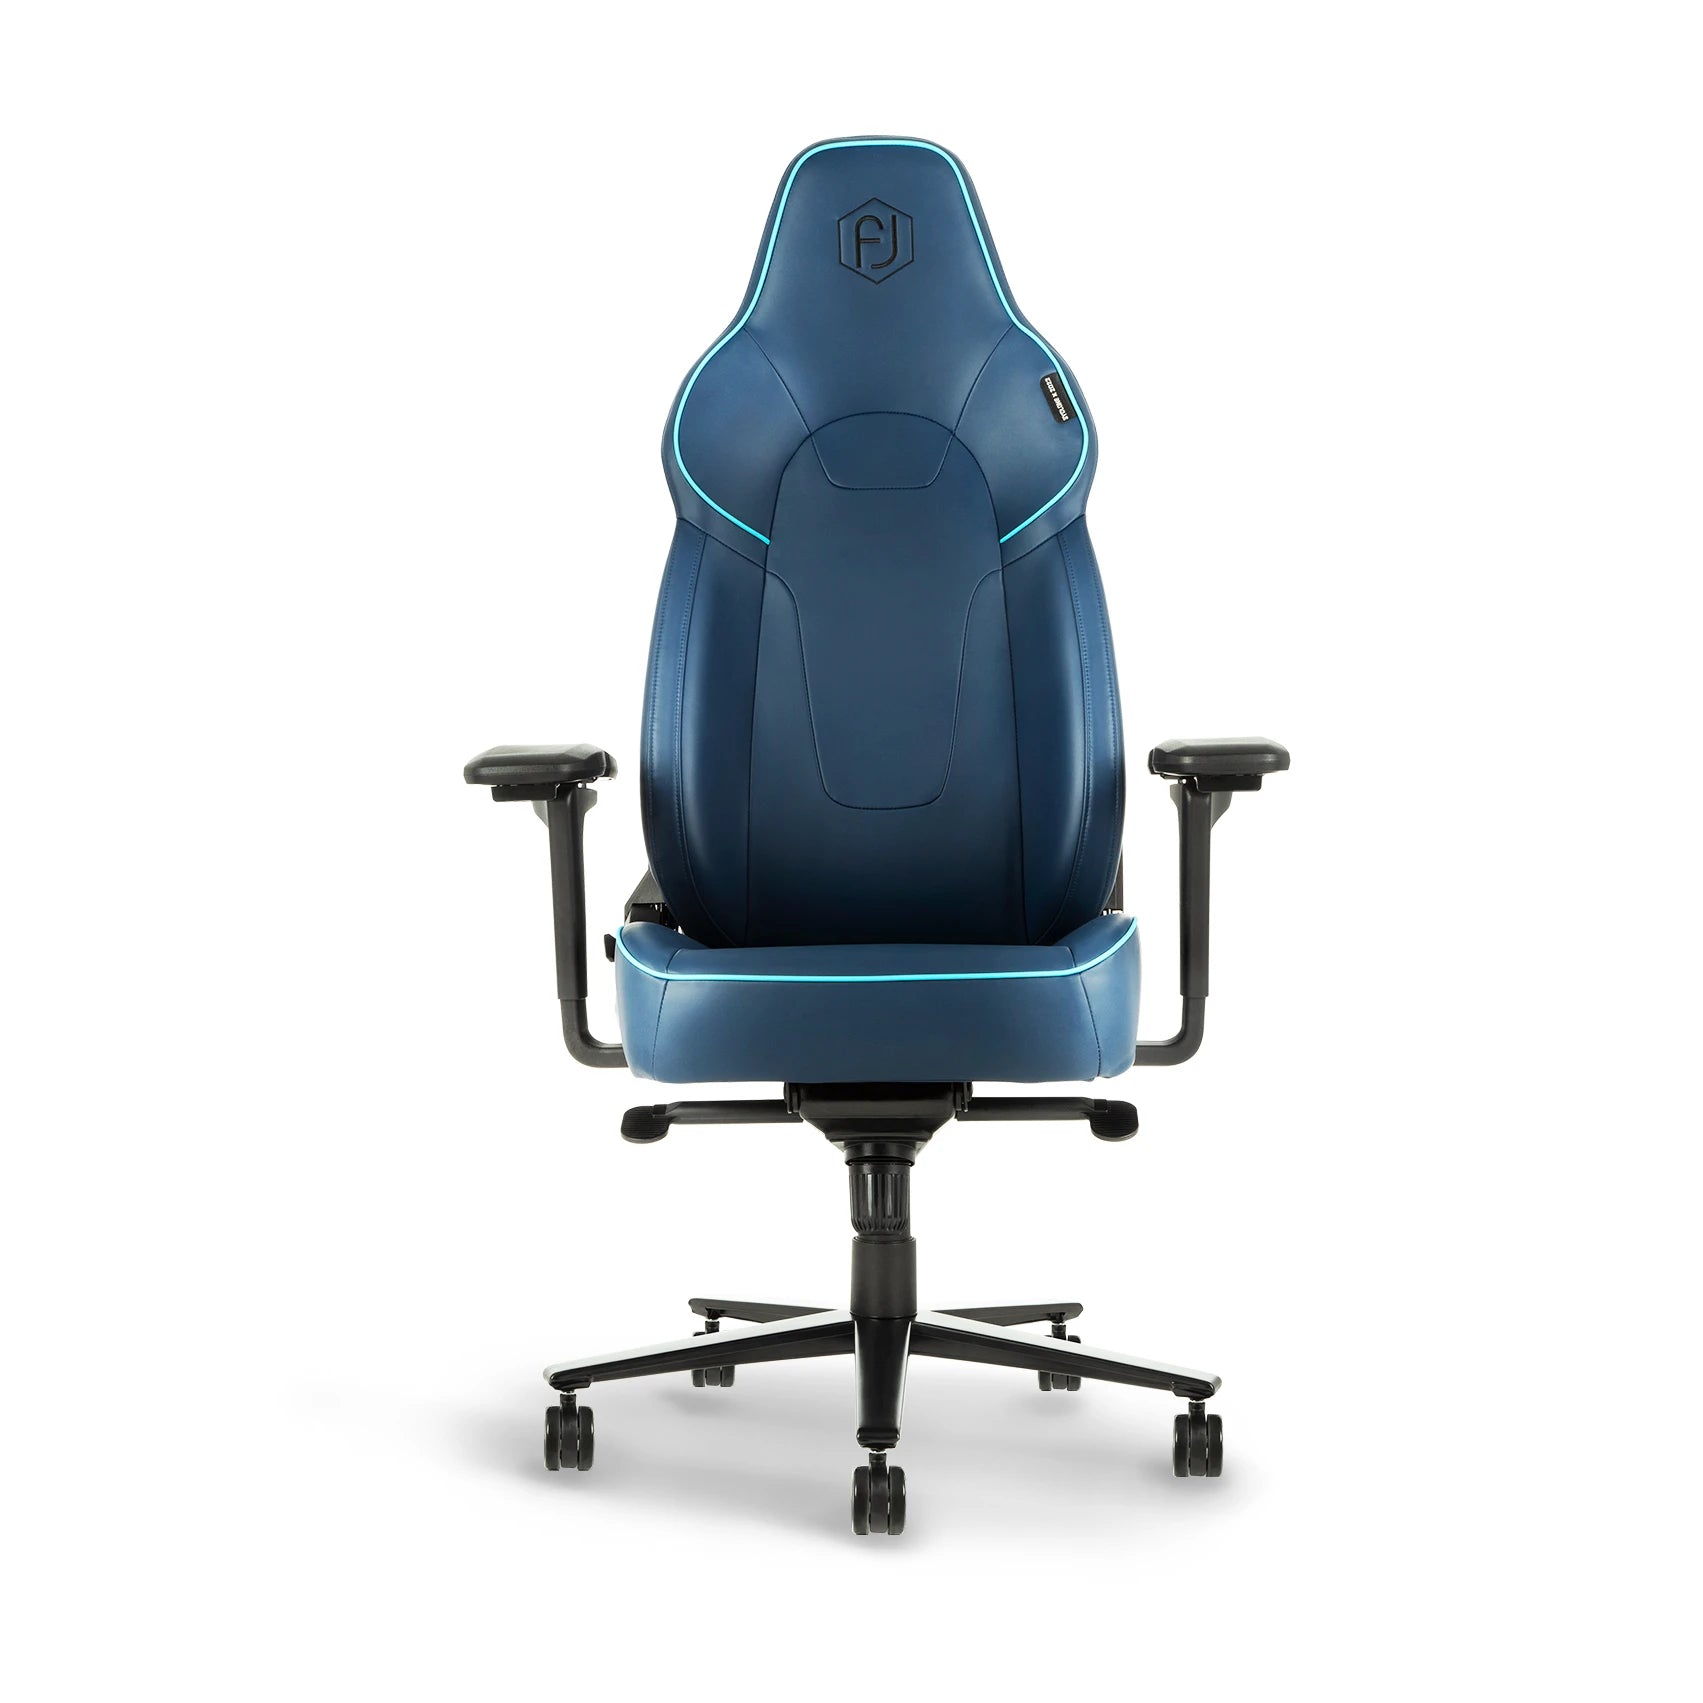 Frontal view of a blue ergonomic gaming chair with black detailing and brand emblem.